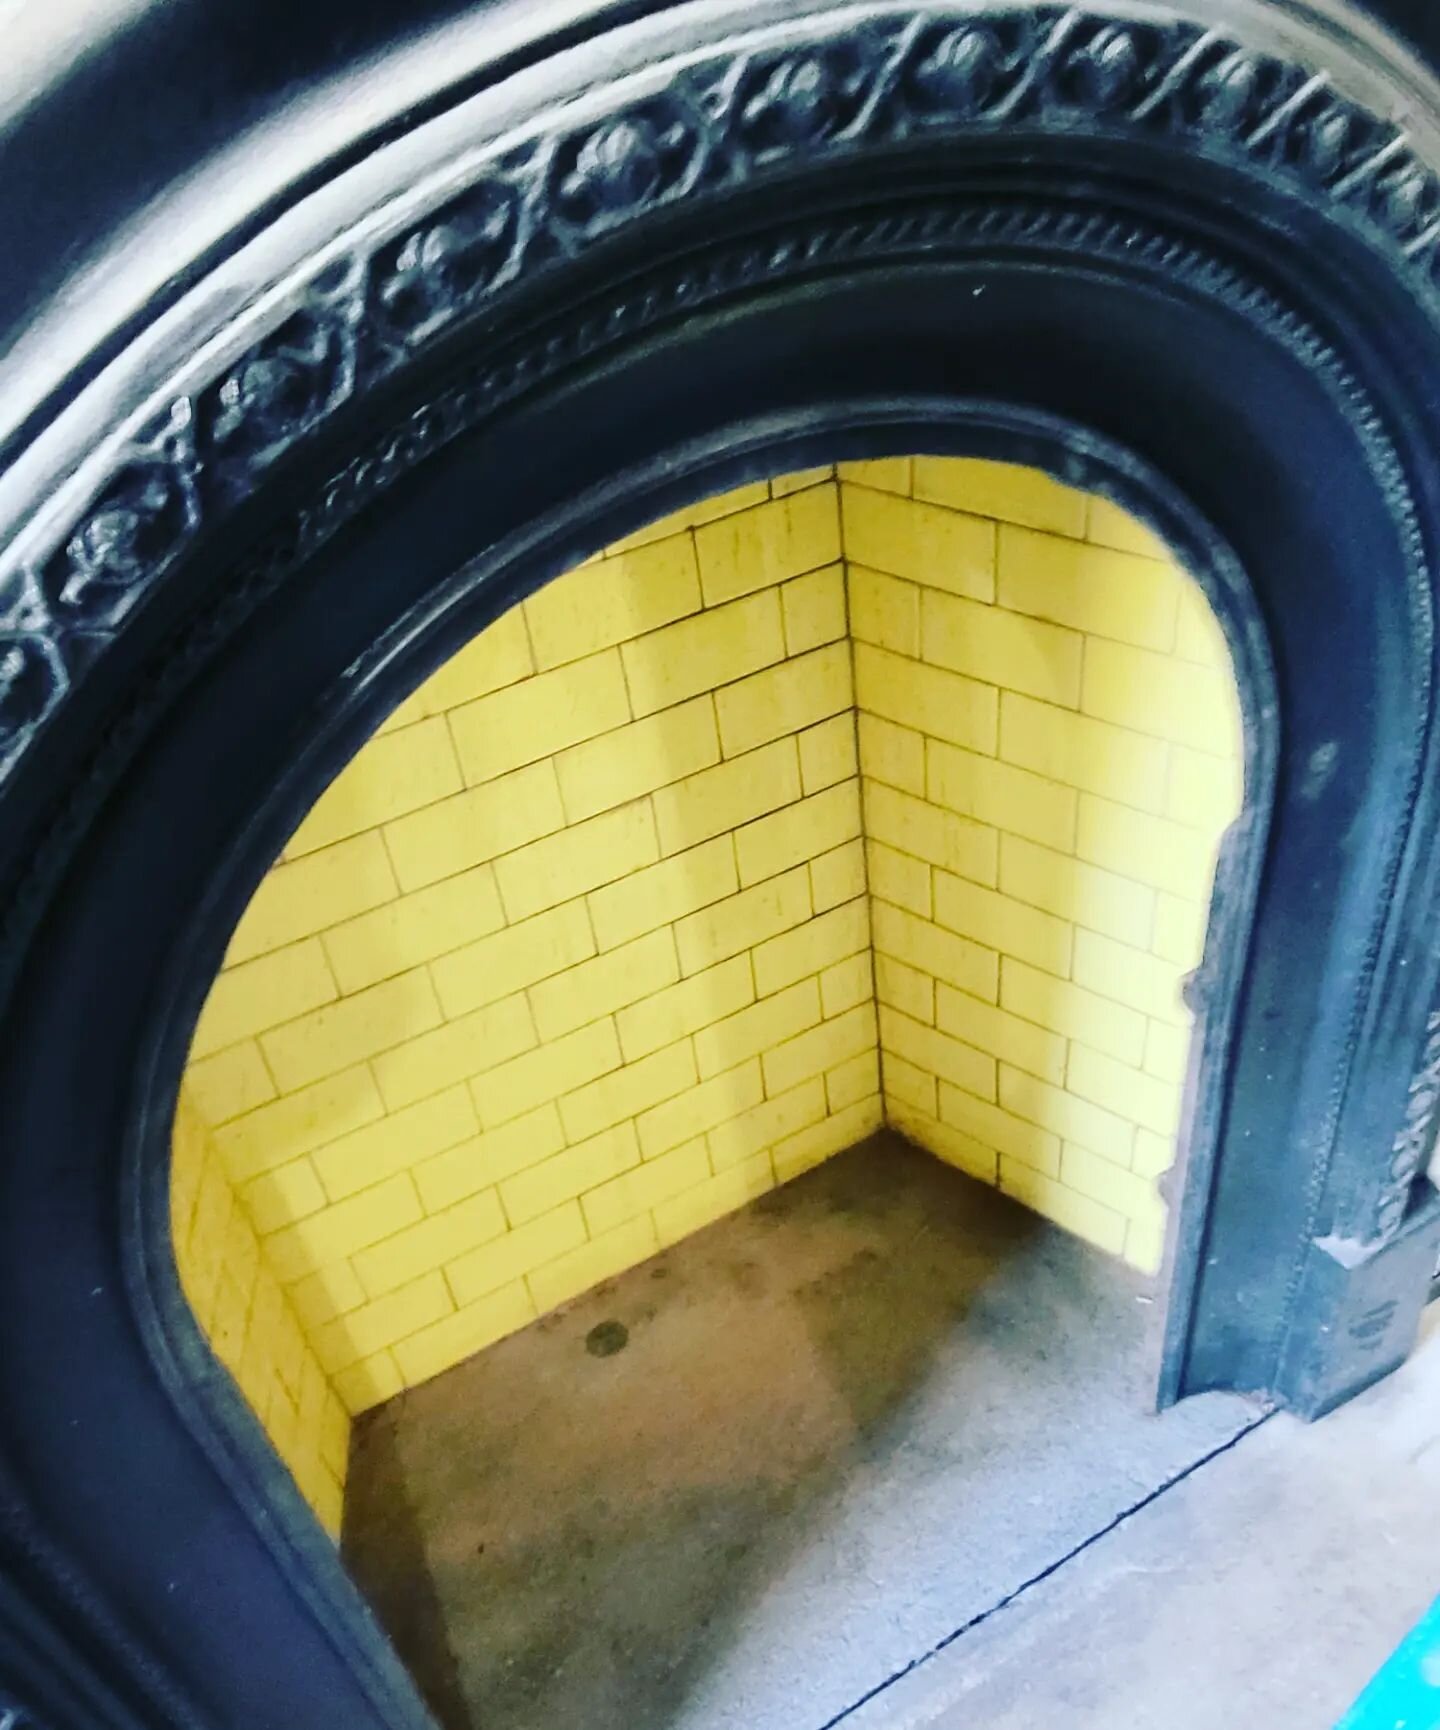 I spy with my little eye a magical pop of vintage history amidst the renovation. #havingagoodday #yellow #vintagestyle #townhouserestoration #westvillage #ownersrepresentative #architecturedesign #historyinthewalls